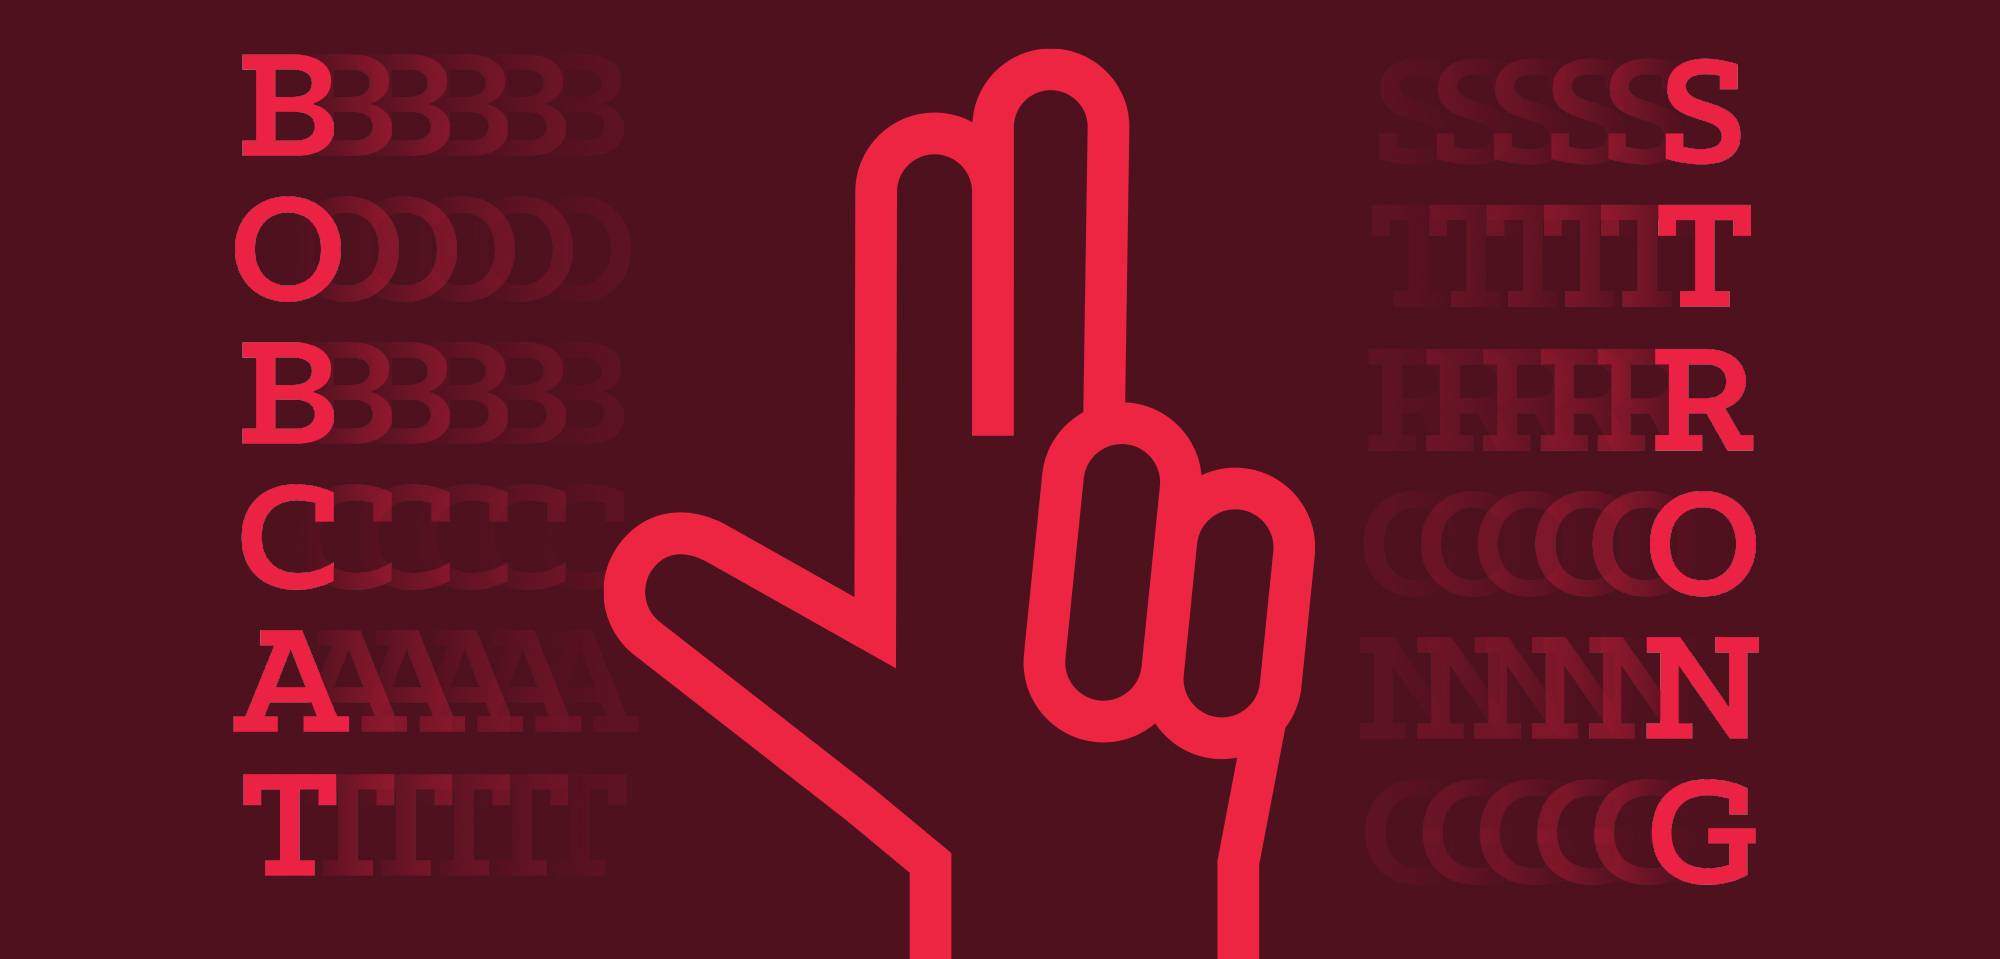 infographic reading "bobcat strong" and texas state handsign